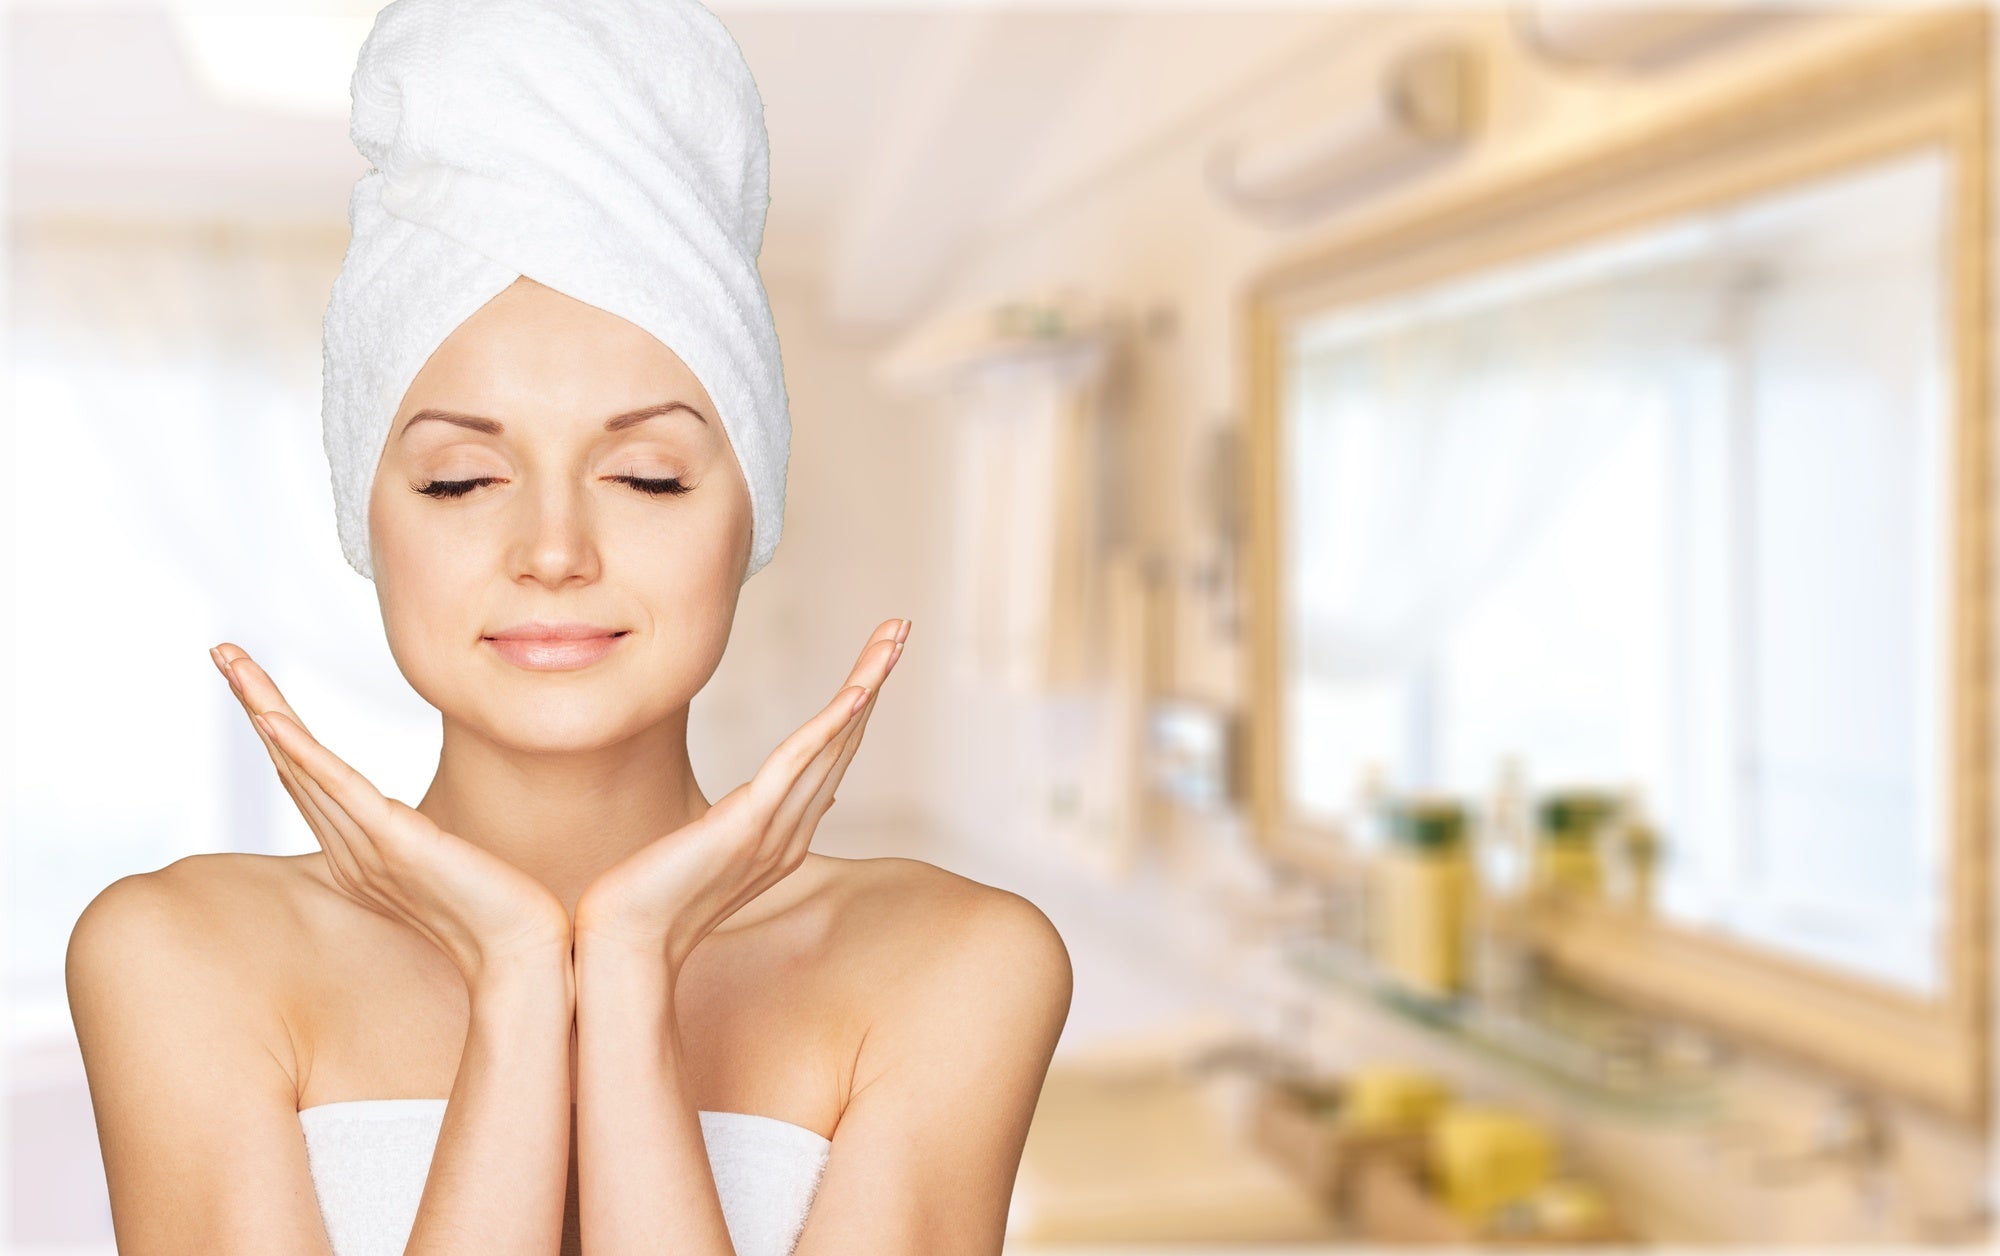 How to Apply Your Skin Care Products in the Right Order